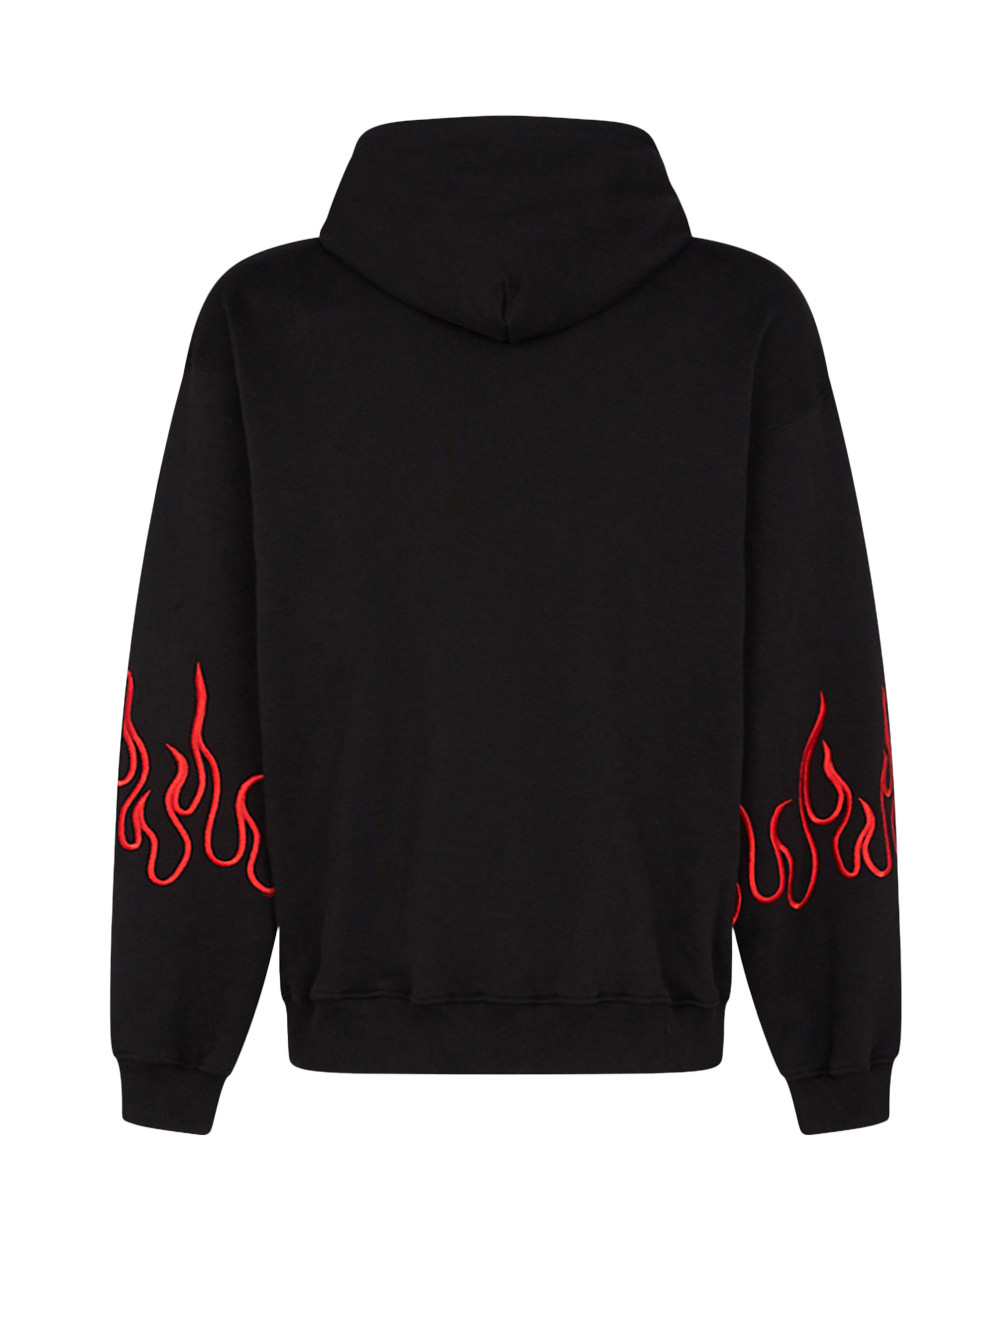 Vision of Super - Sweatshirt with embroidered flames, Black, large image number 4